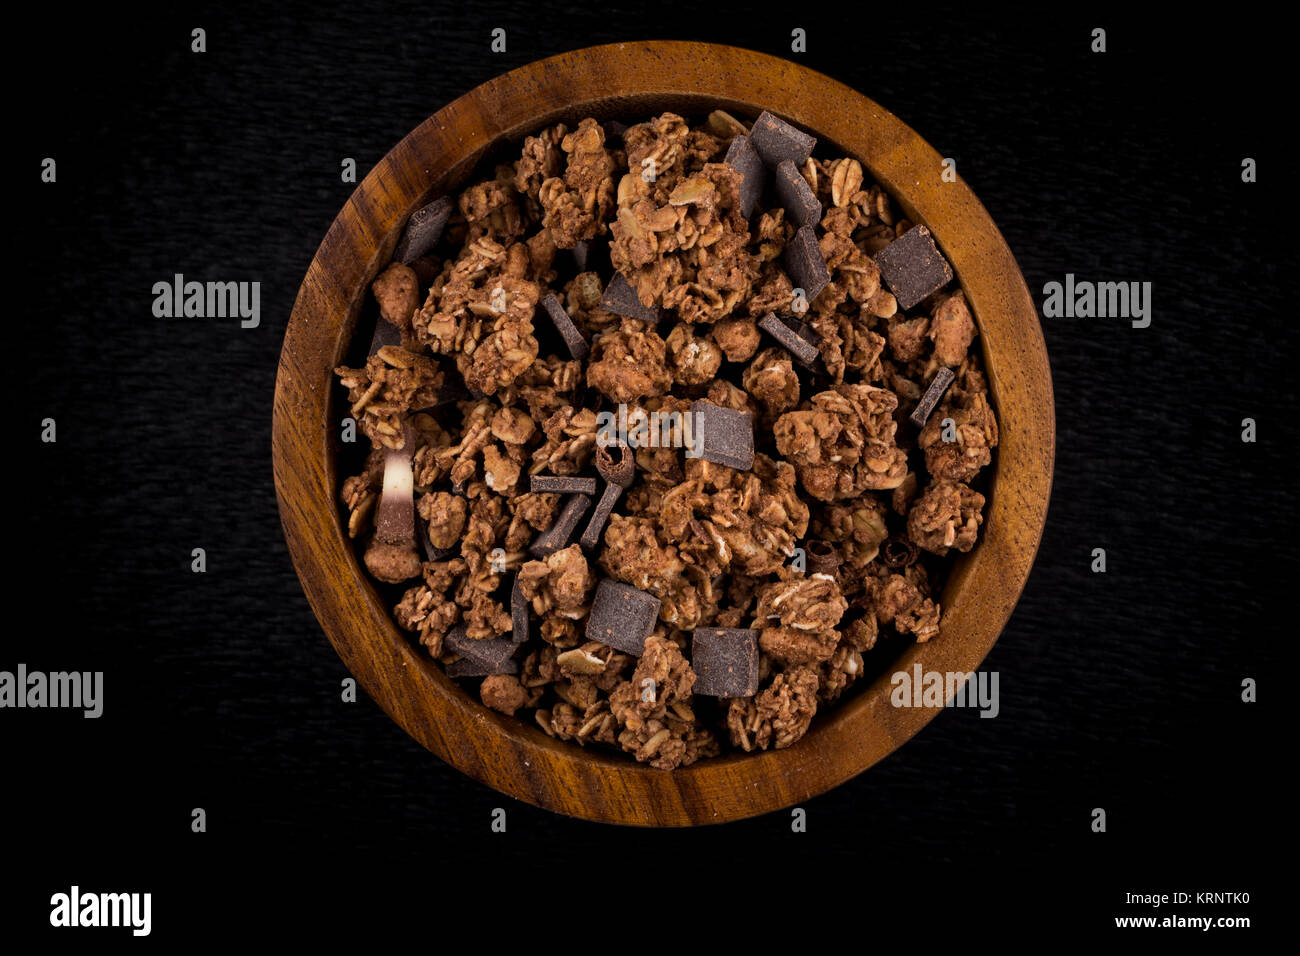 Close up of chocolate muesli with pieces of chocolate in a bowl on white  isolated background Stock Photo - Alamy